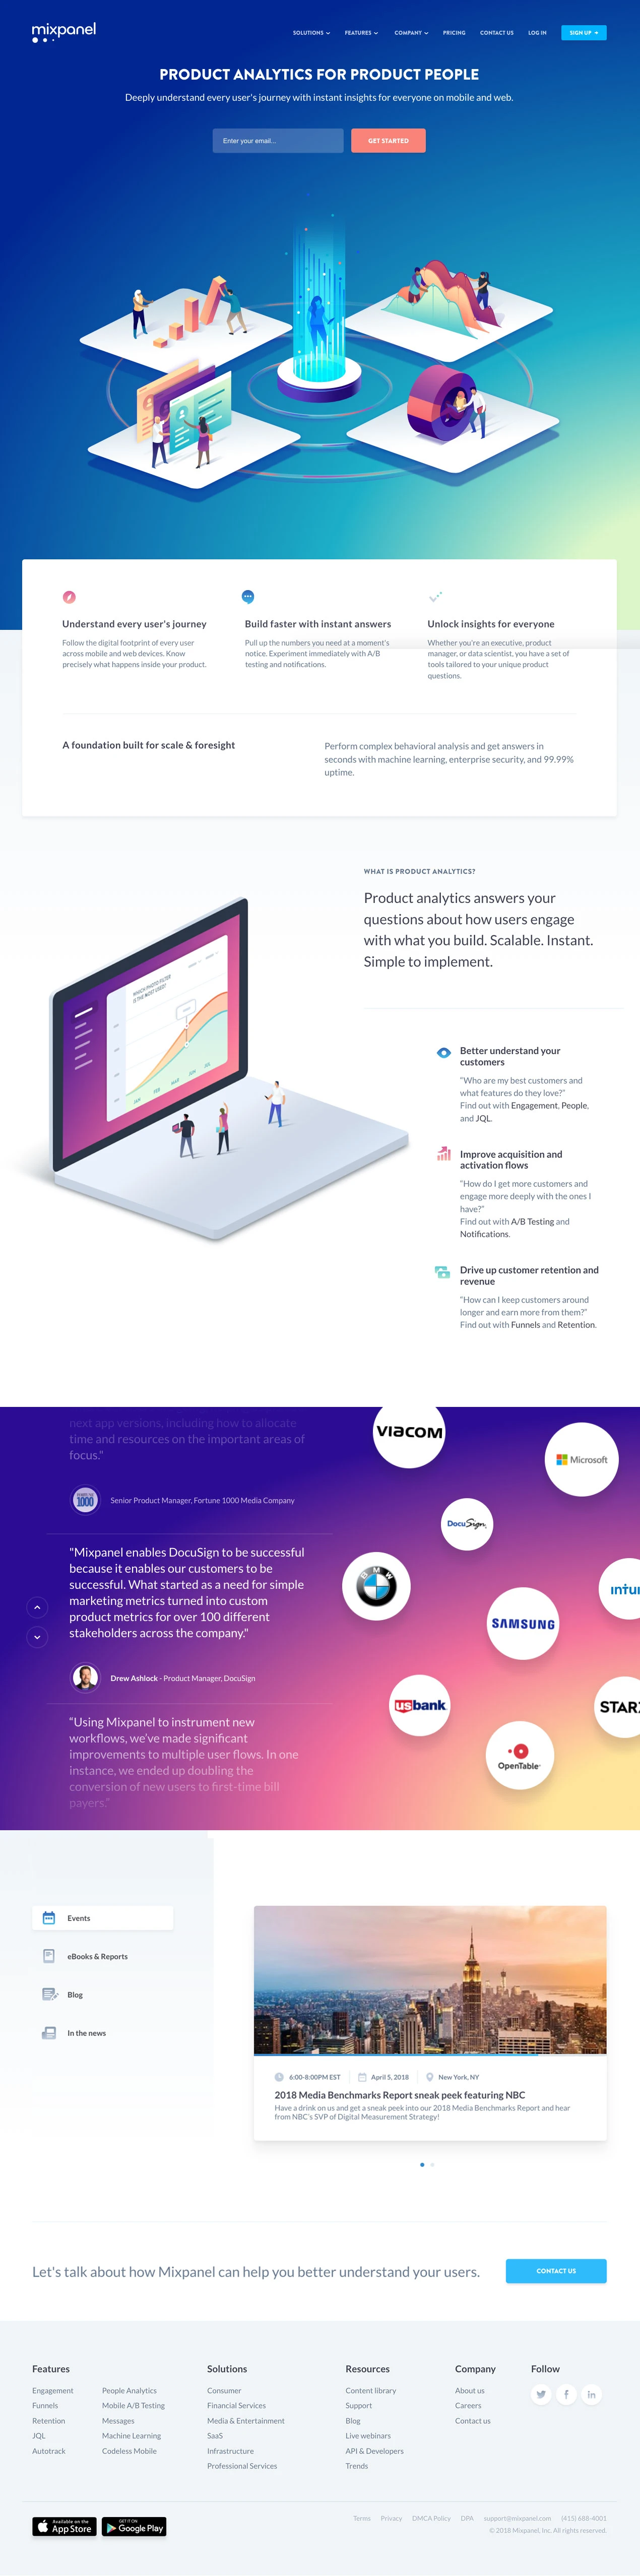 Mixpanel Landing Page Example: Deeply understand every user's journey with instant insights for everyone on mobile and web.